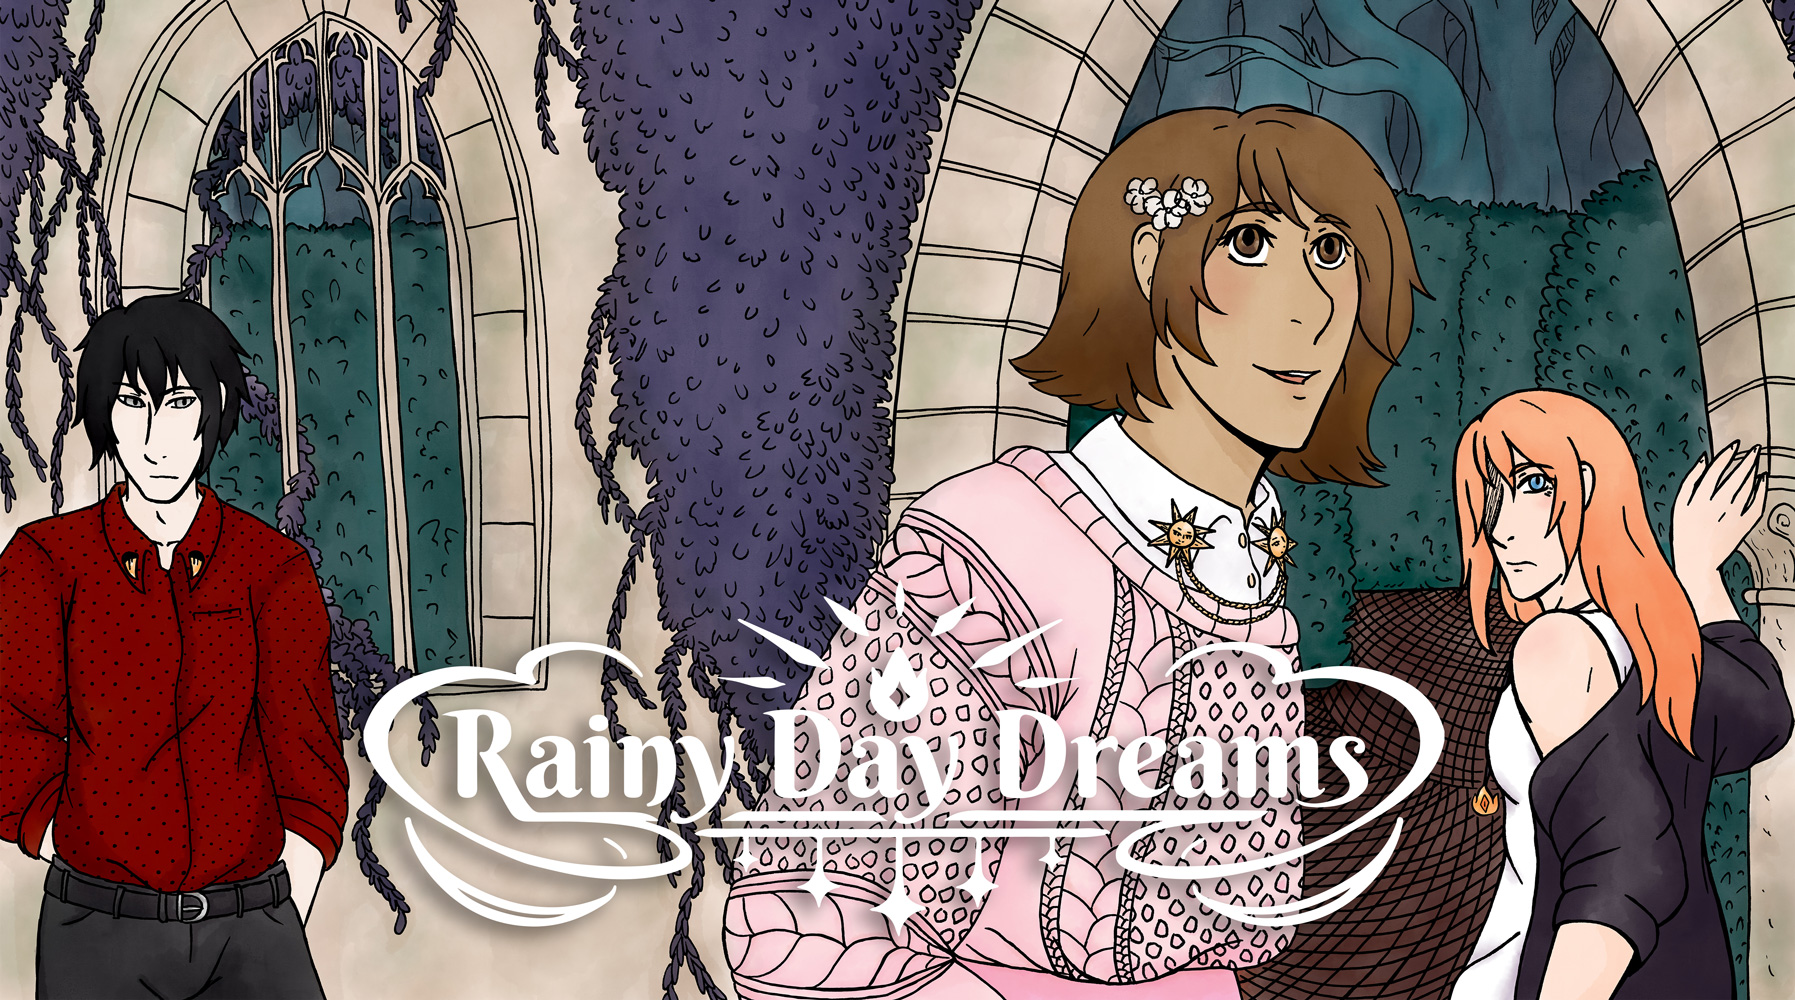 Welcome to Rainy Day Dreams